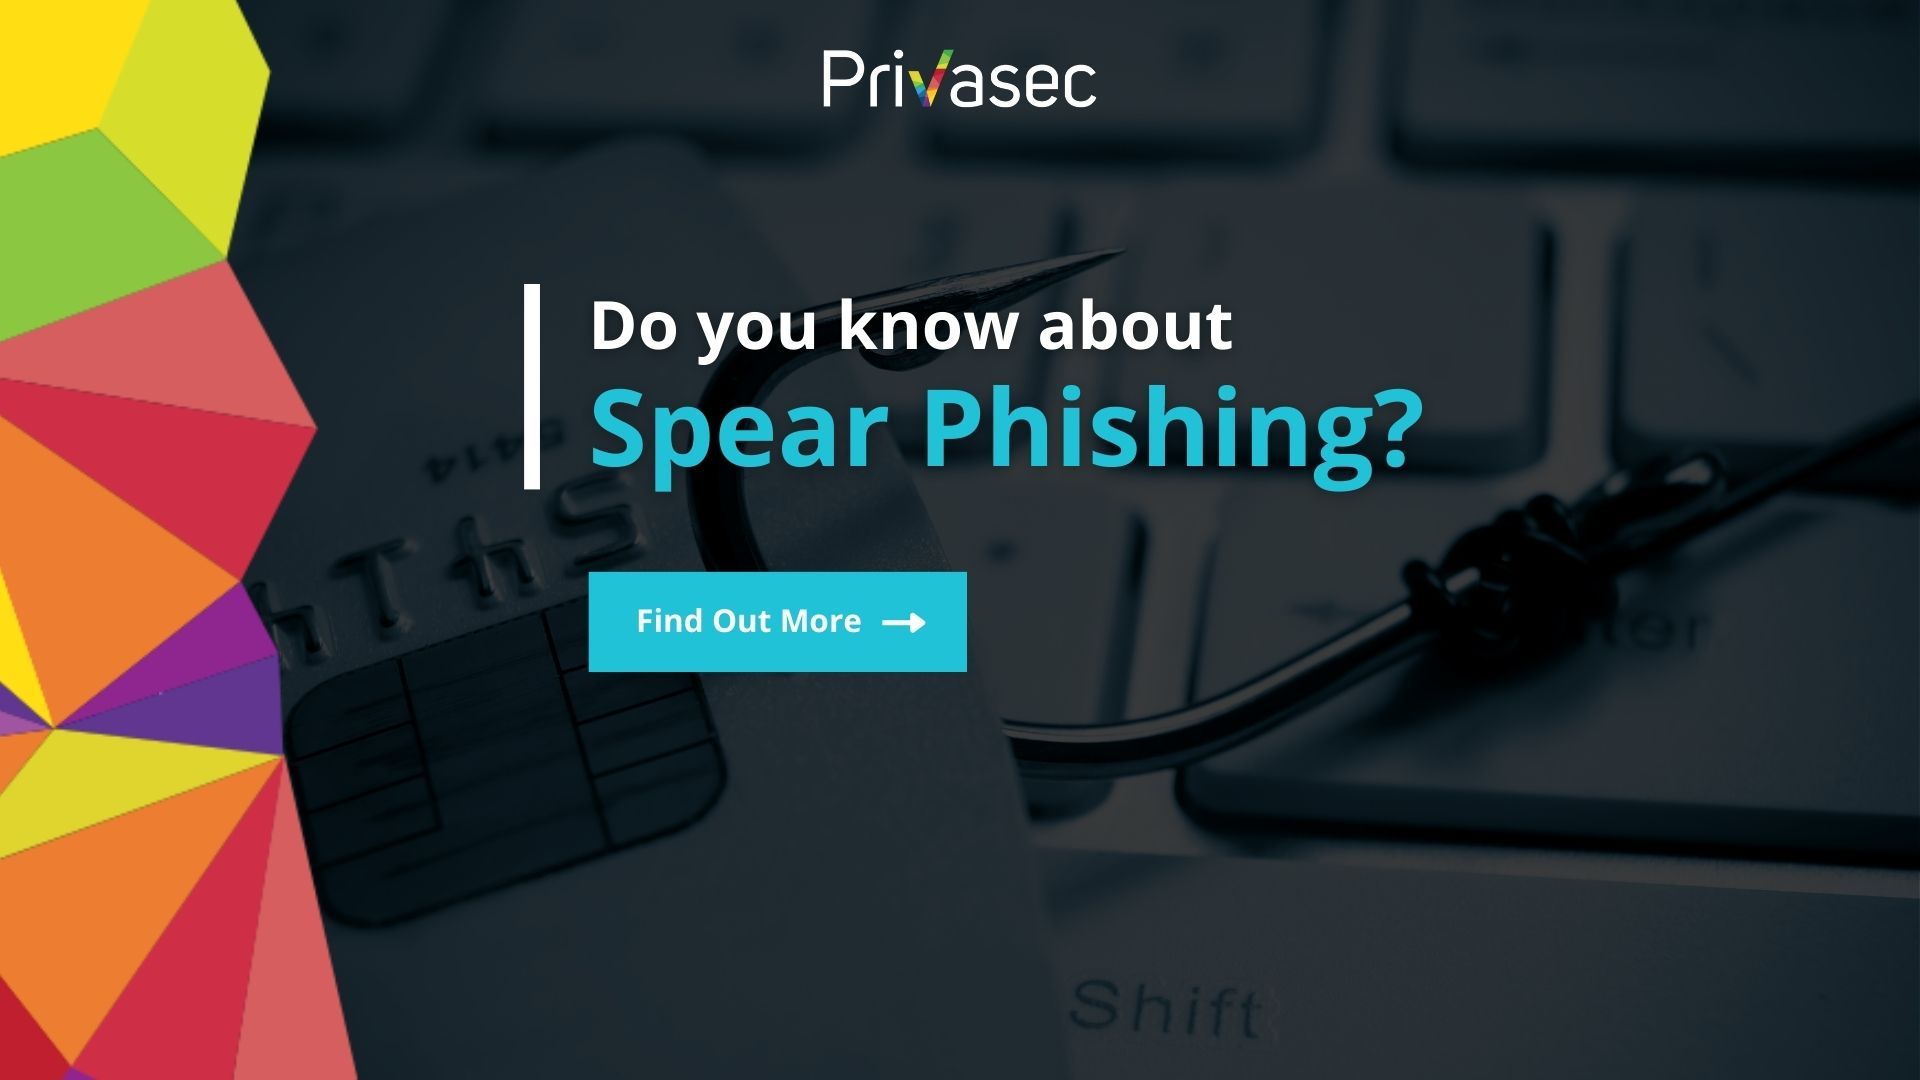 Do you know about Spear Phishing?